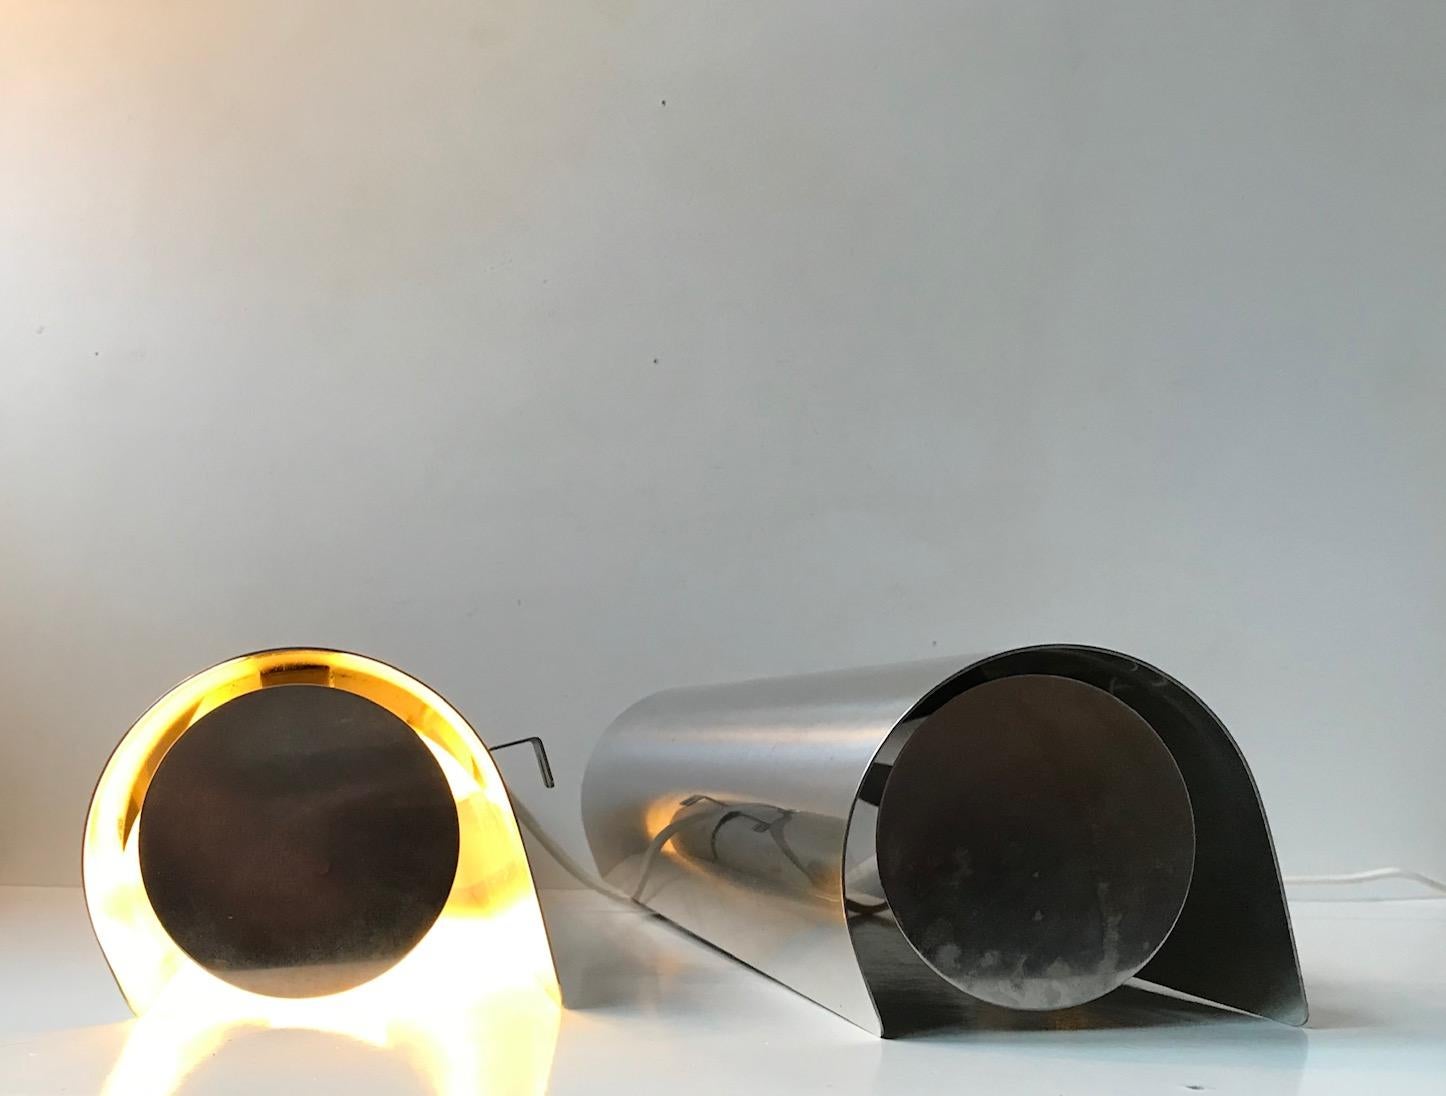 A rare pair of polished stainless steel wall lights. Cylindrical - tubular in shape and measuring 40 cm in width/length. Designed and manufactured by K. S. Design in Denmark during the late 1970s. The style of Nordic Lighting Minimalism is very